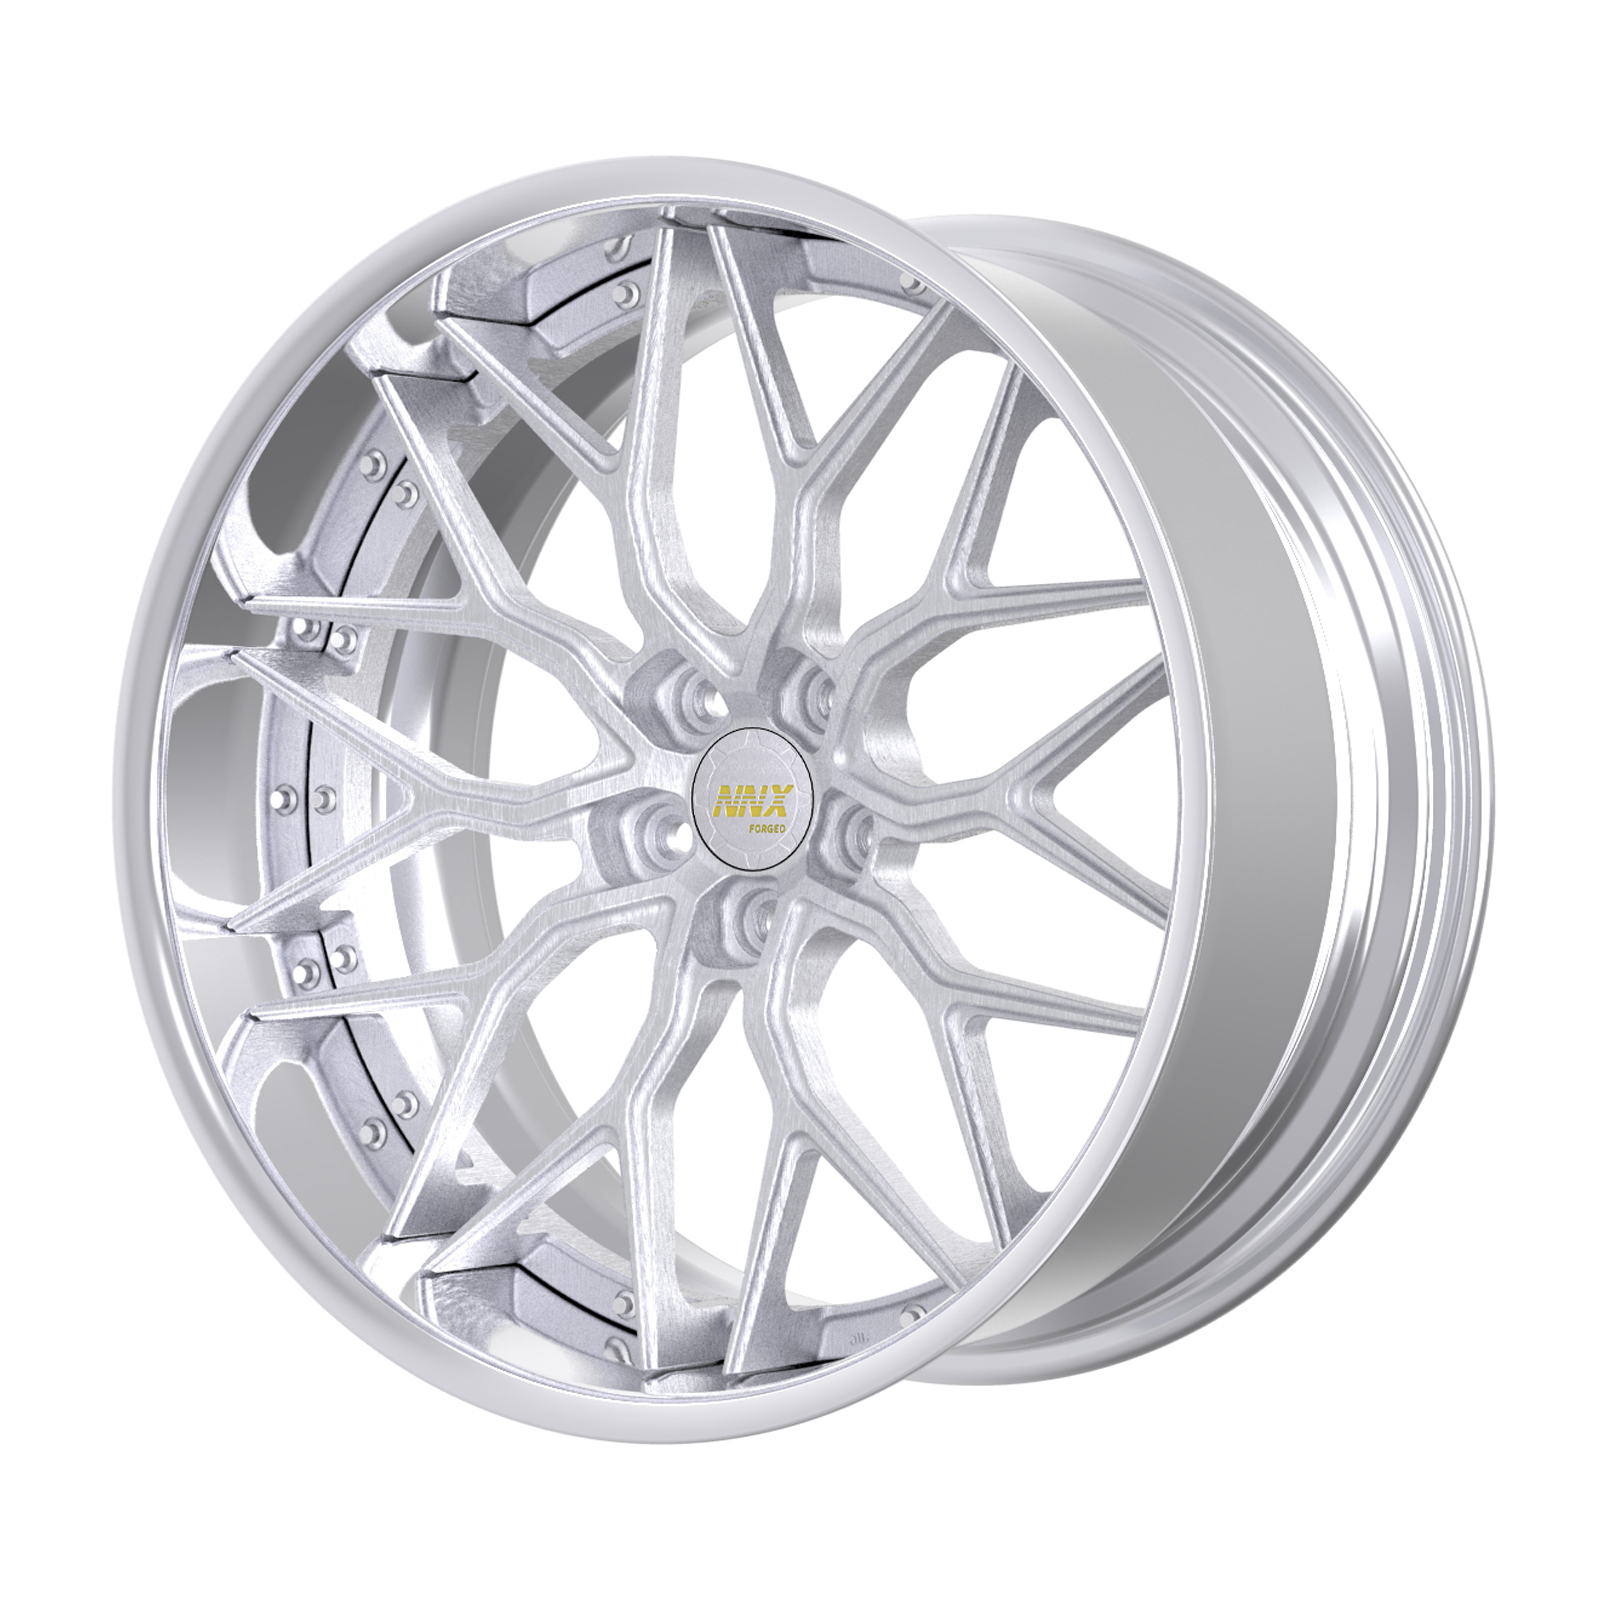 NNX-S129   New designs aluminum 5×120 5×114.3 5×112 18 19 20 21 22inch forged wheels,18 19  20 21 22 inch alloy always in stock